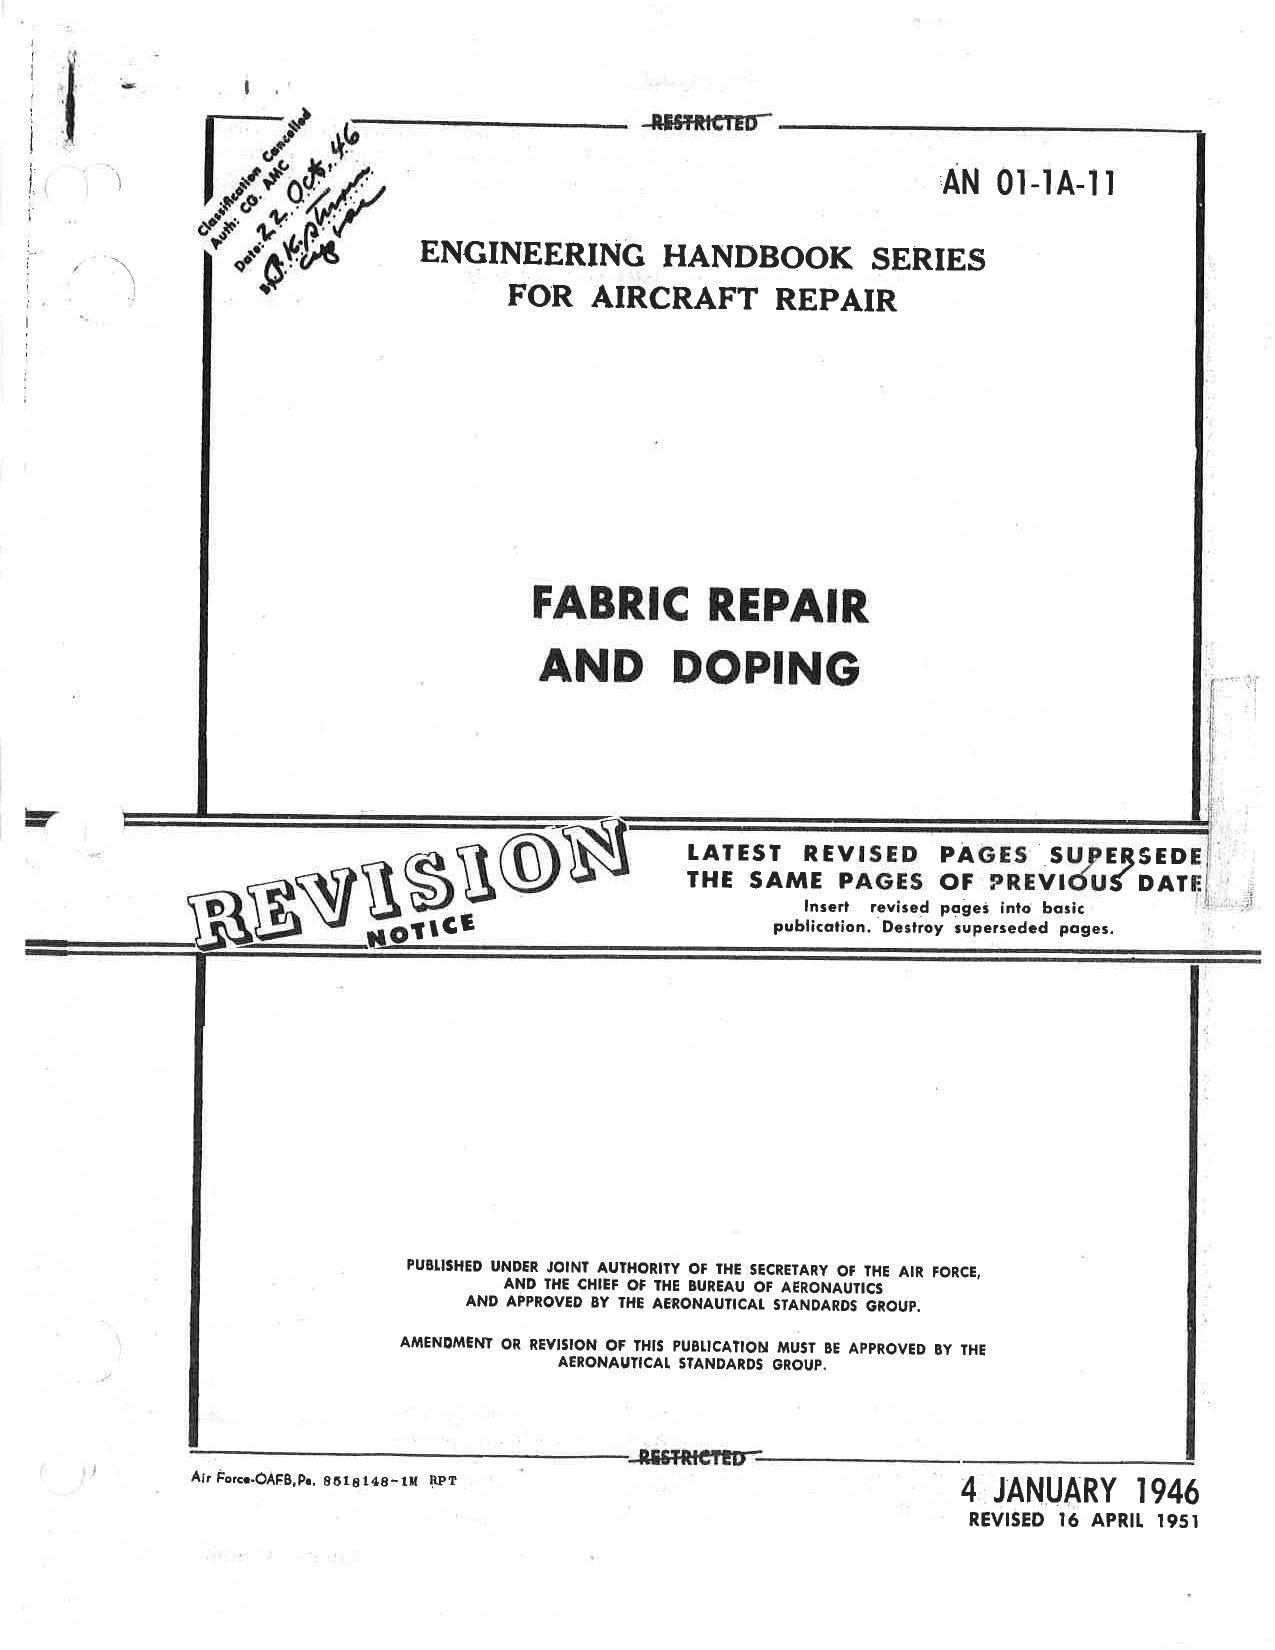 Sample page 1 from AirCorps Library document: Fabric Repair and Doping - Engineering Handbook Series for Aircraft Repair